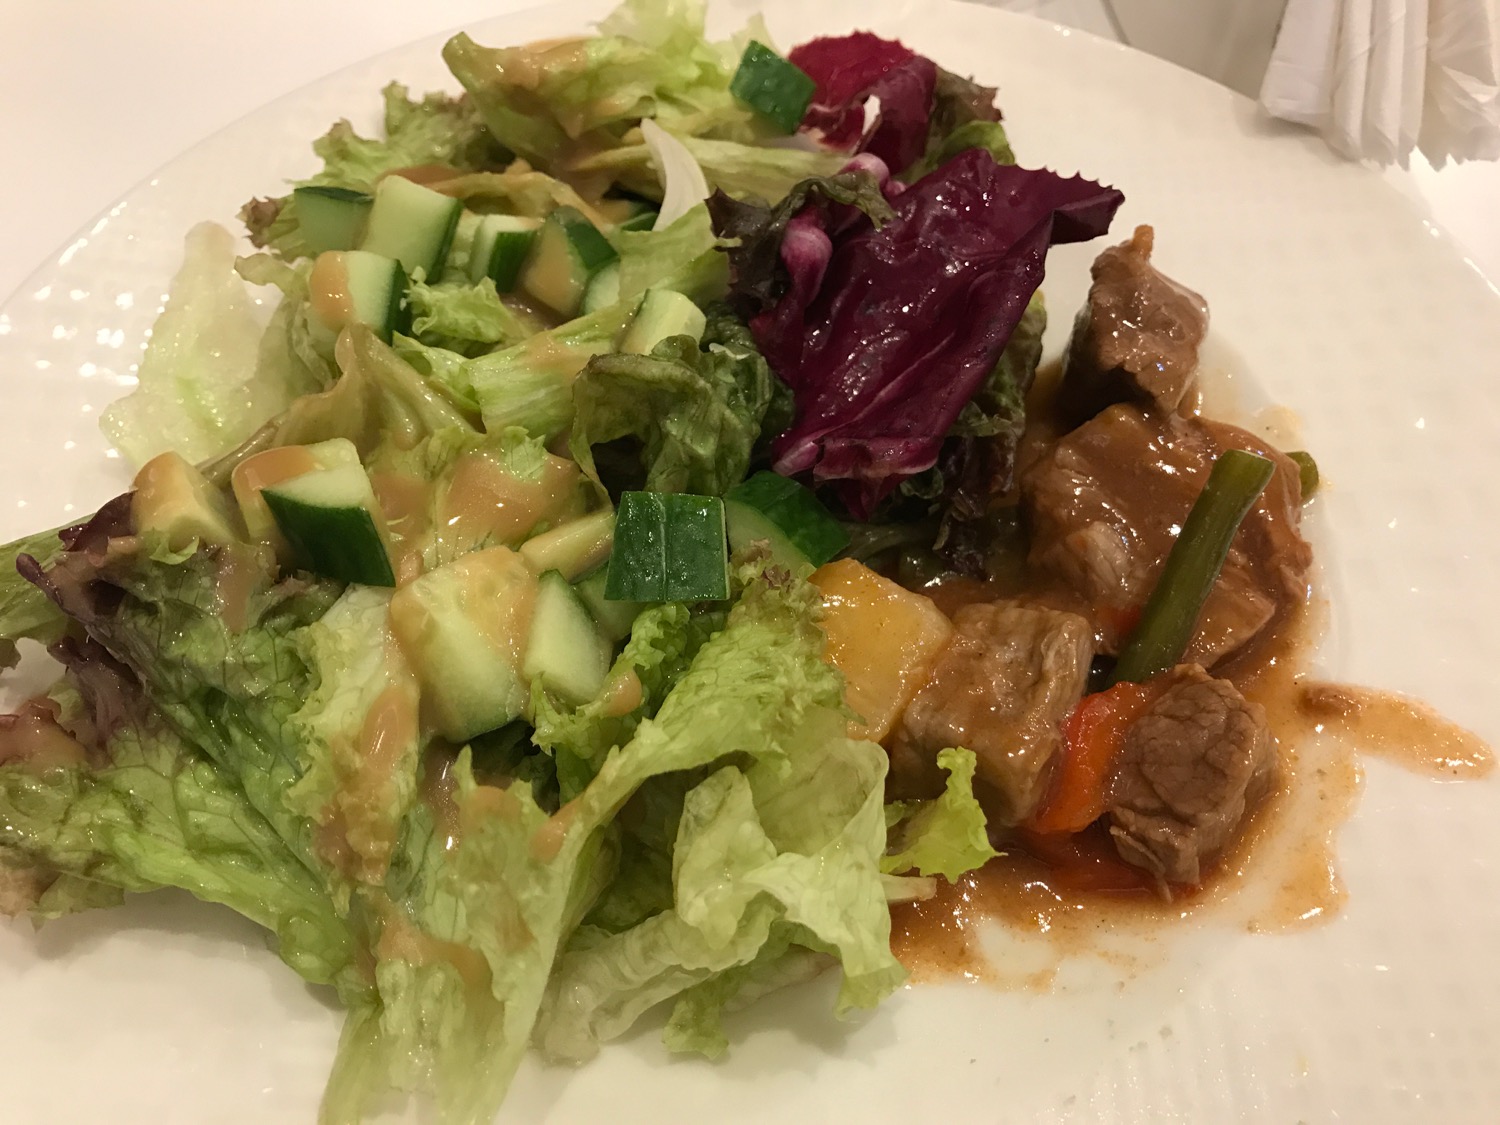 a plate of salad with meat and vegetables